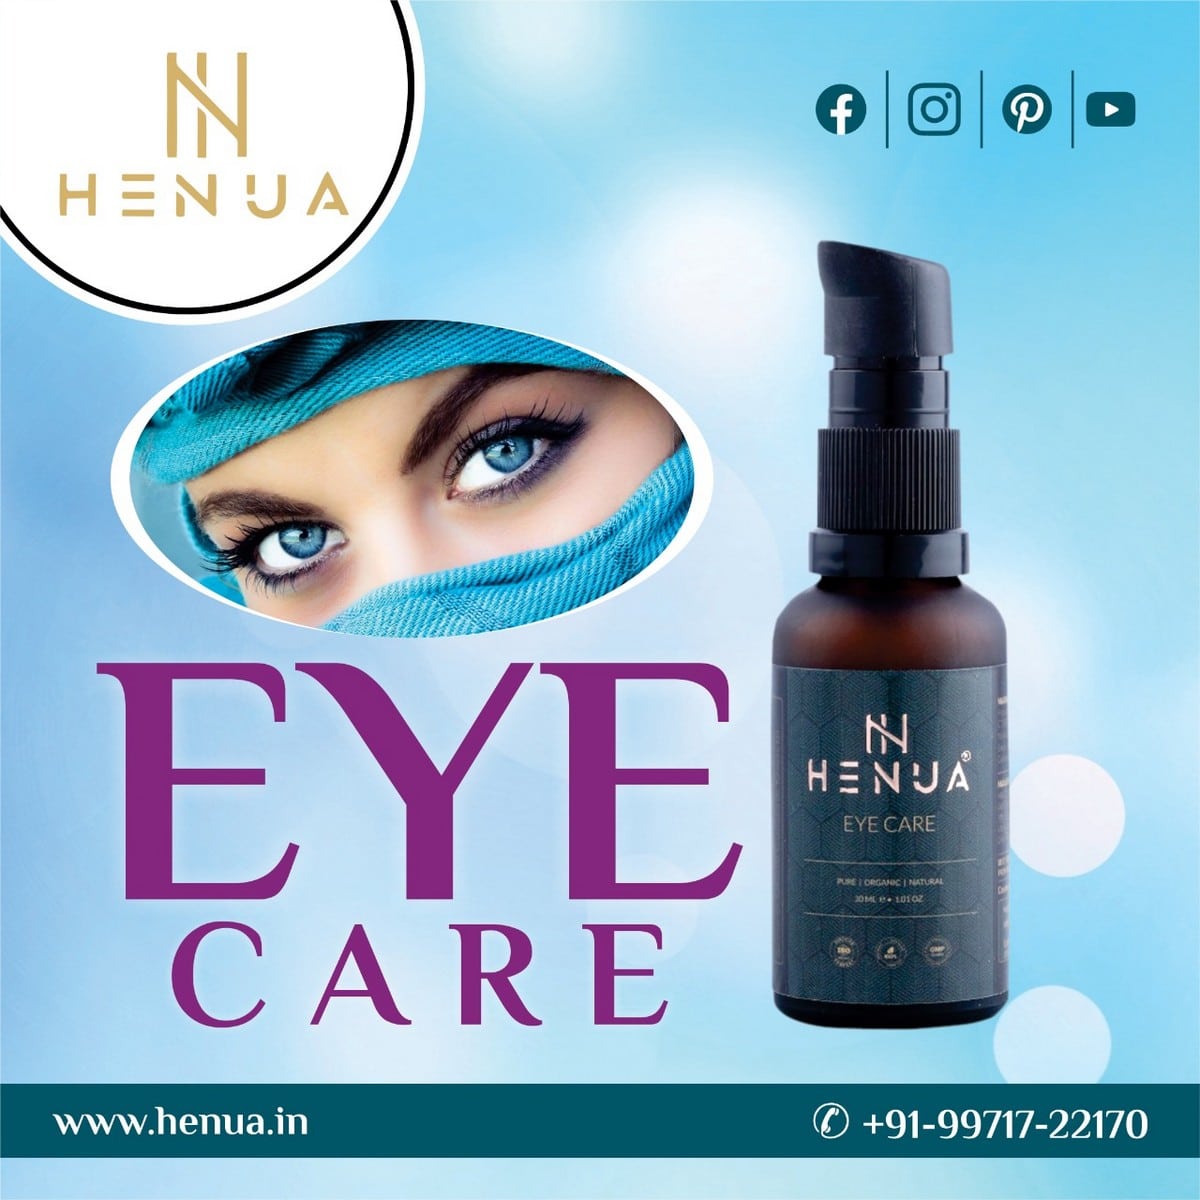 An Organic Eye Care for Clear Reflections